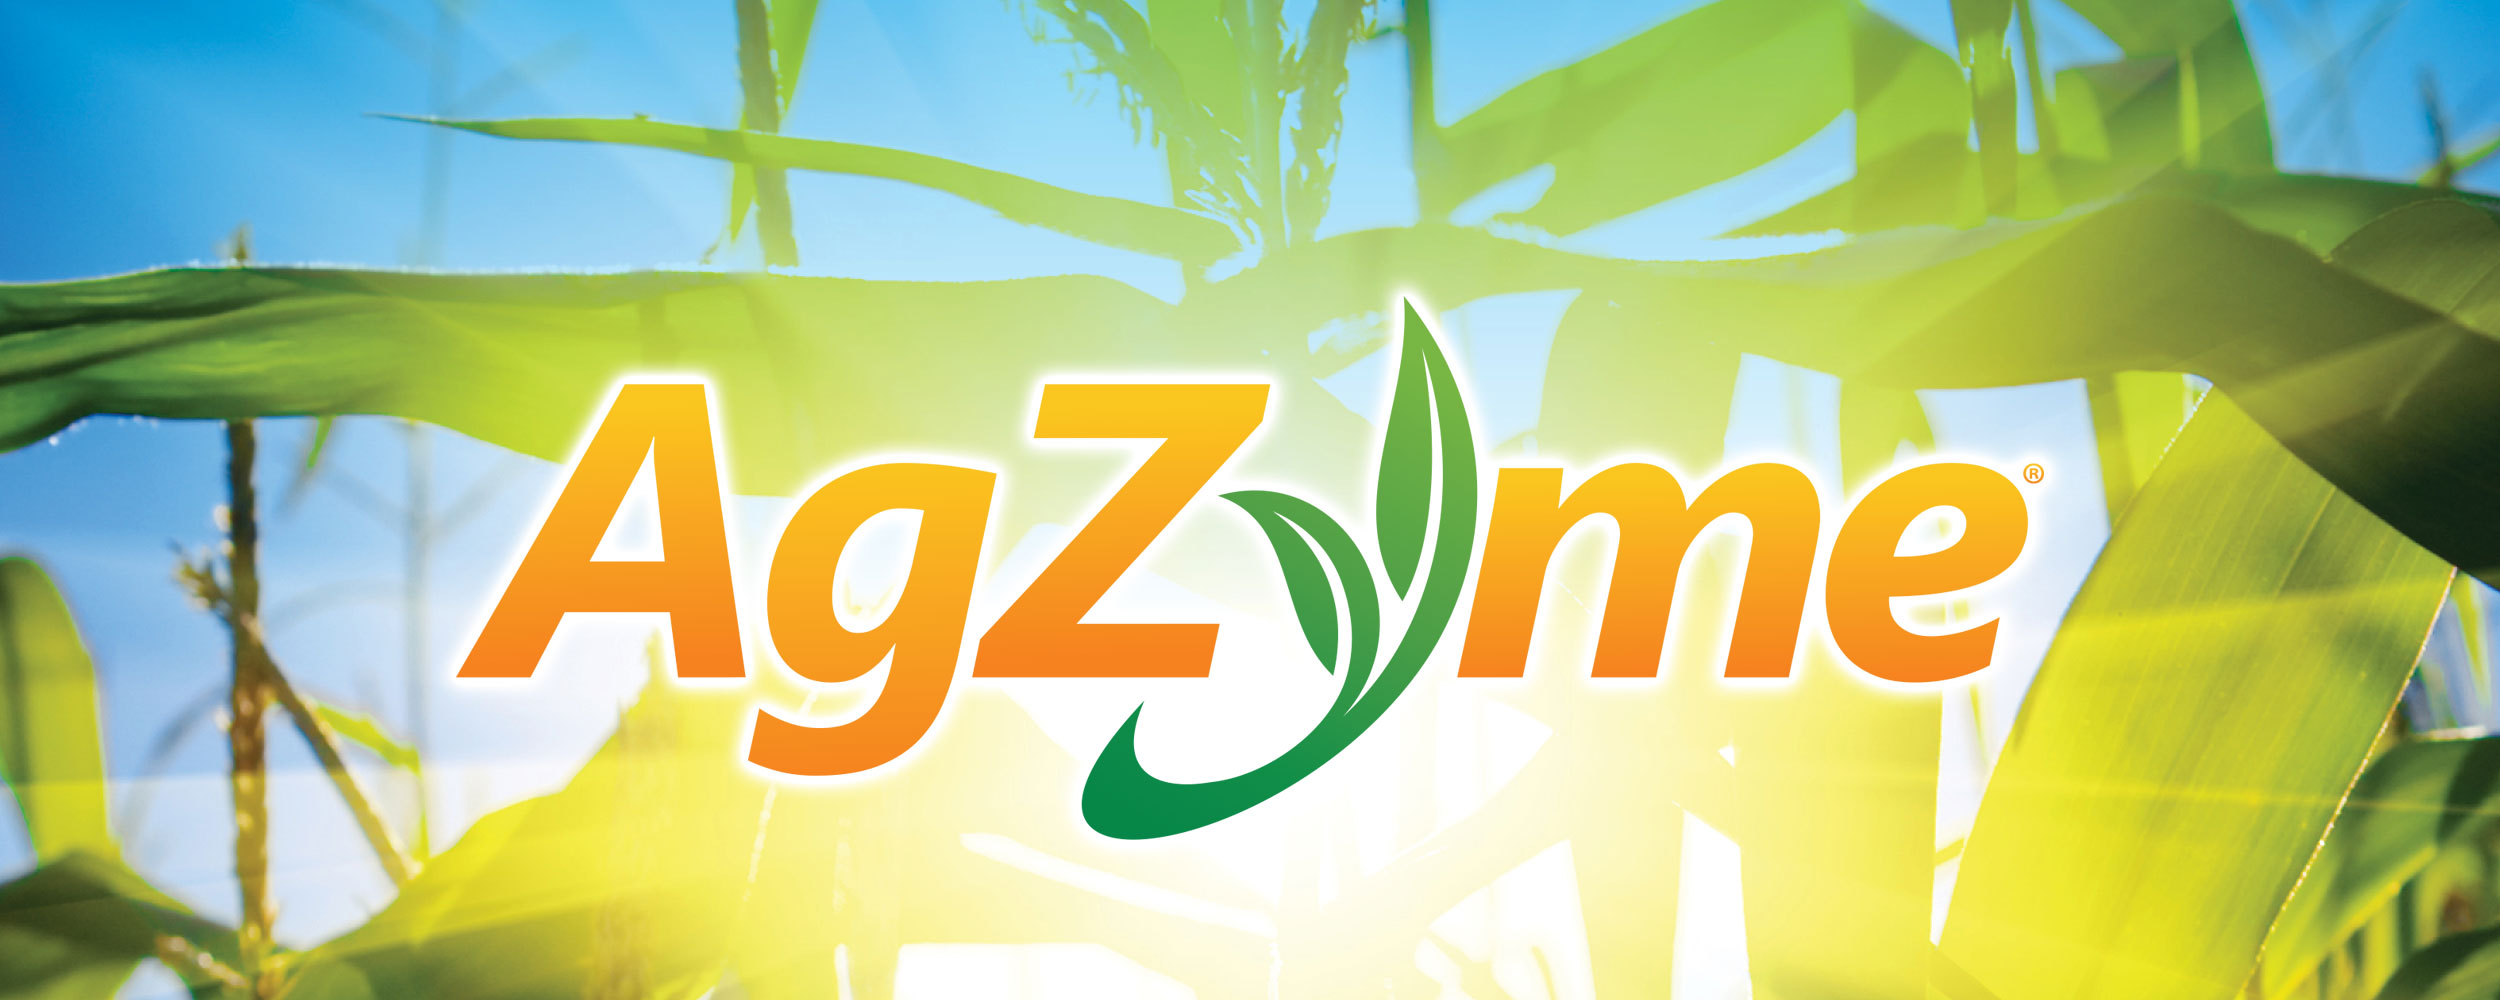 AgZyme Banner